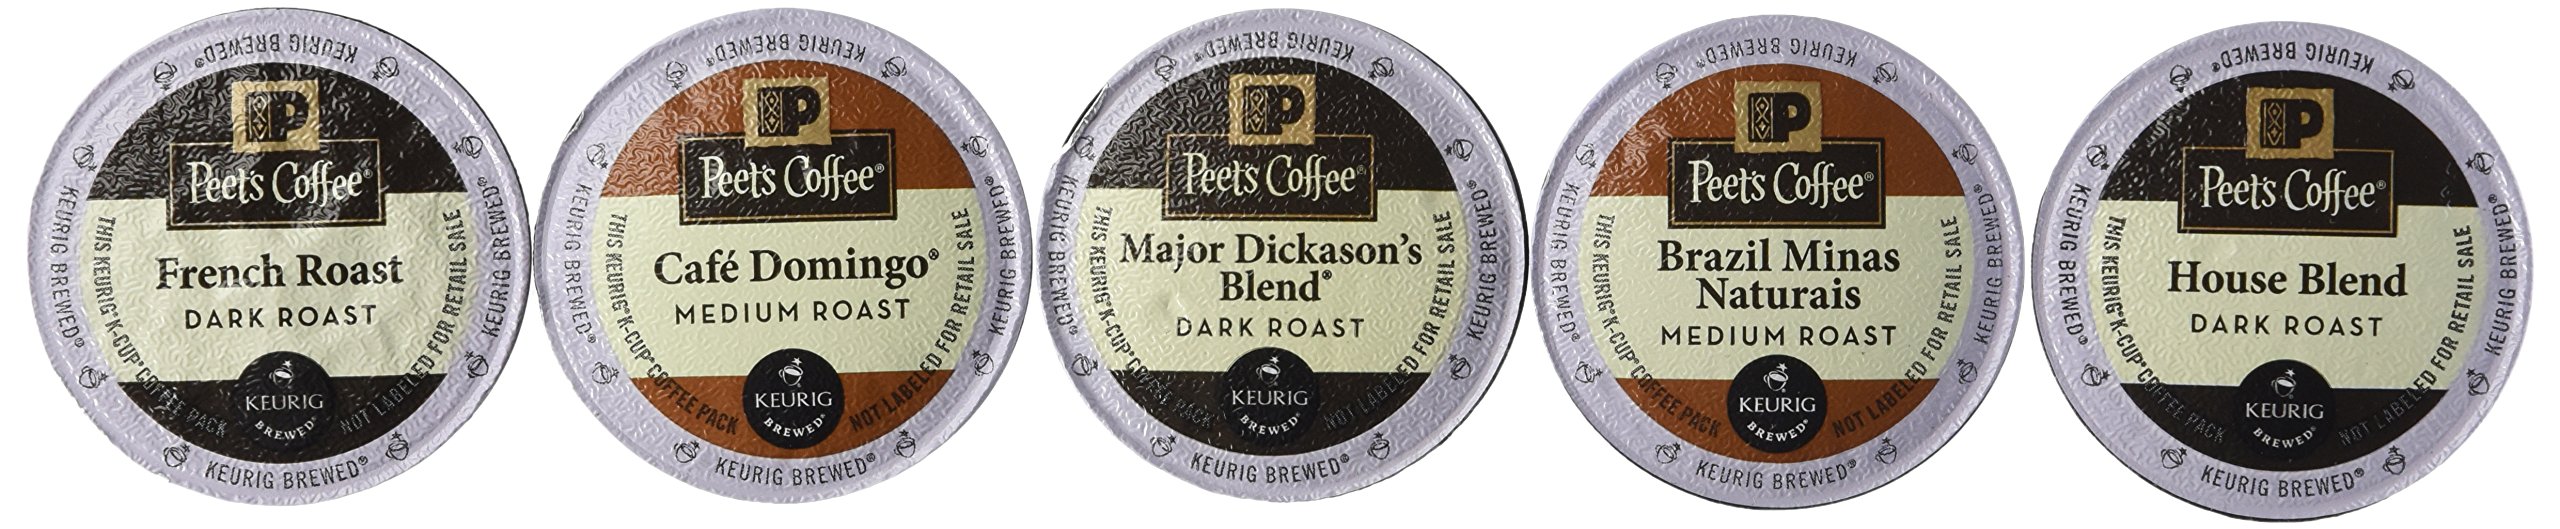 Book Cover Peets Coffee Sampler Variety Pack without Decaf (Brazil Minas Naturais, Cafe Domingo, House Blend, Major Dickasons, French Roast), 30 K-cup